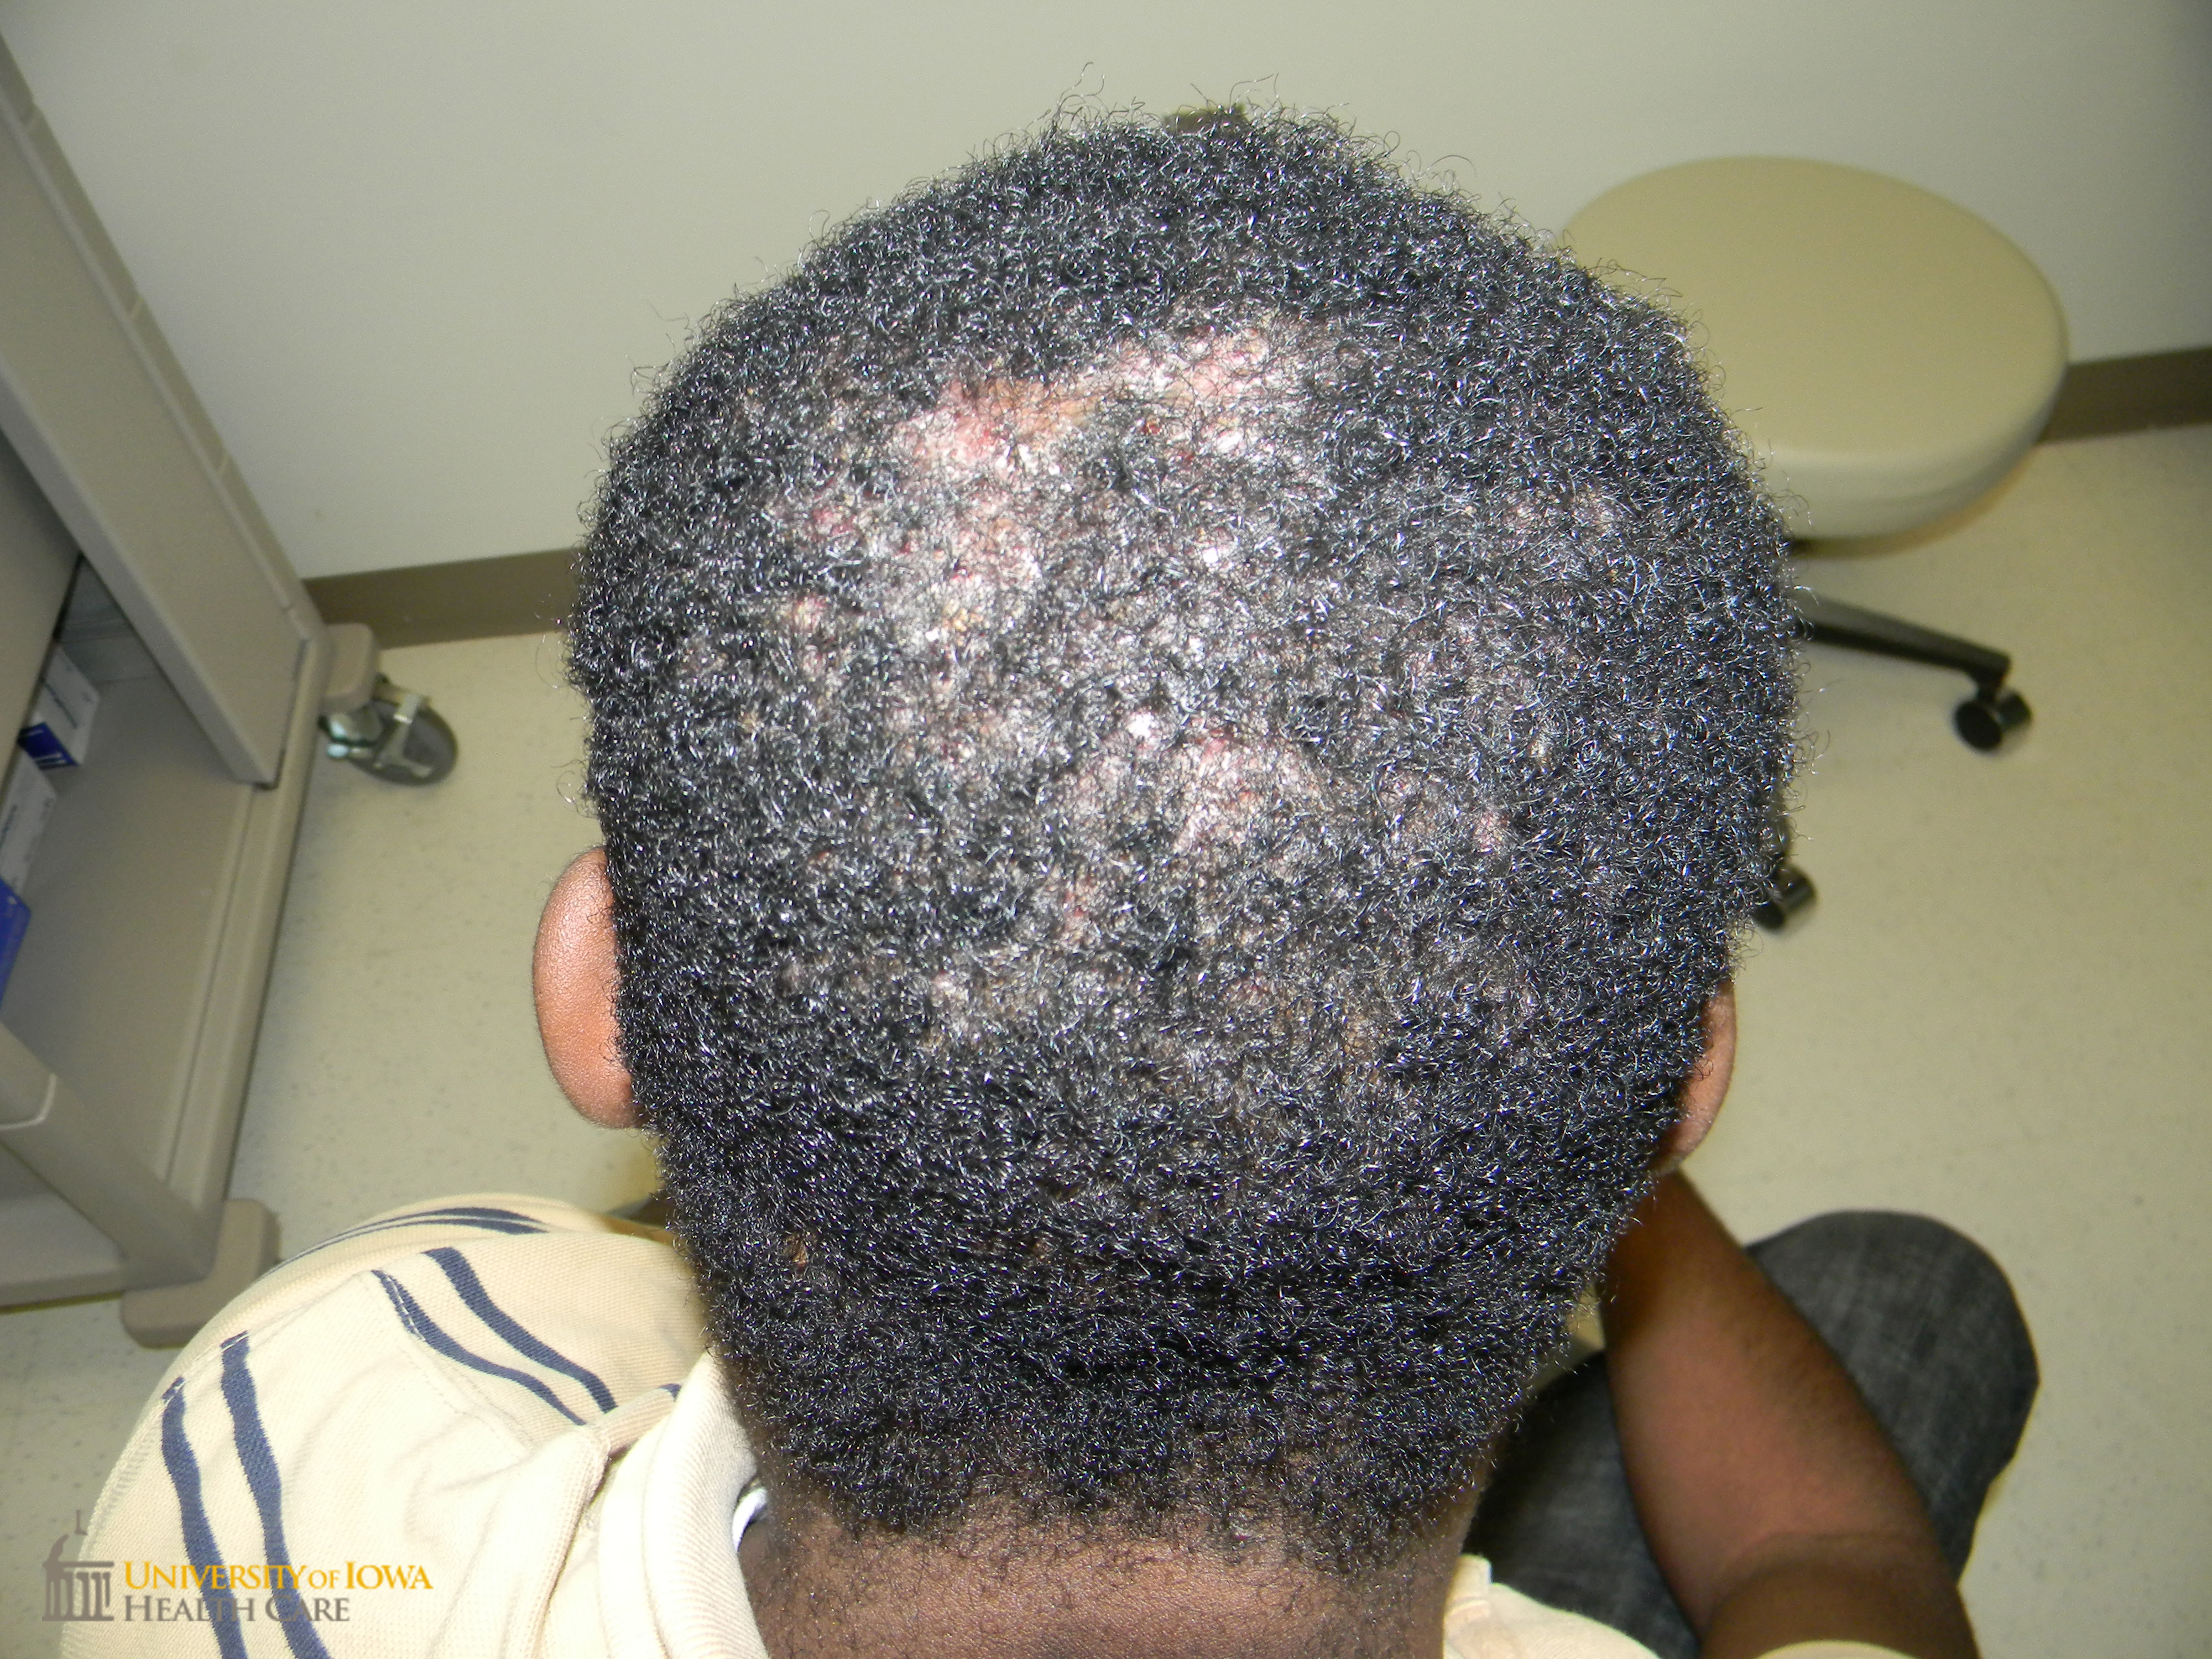 Diffuse confluent keloidal plaques and nodules with associated scaring alopecia on the occipital scalp. (click images for higher resolution).